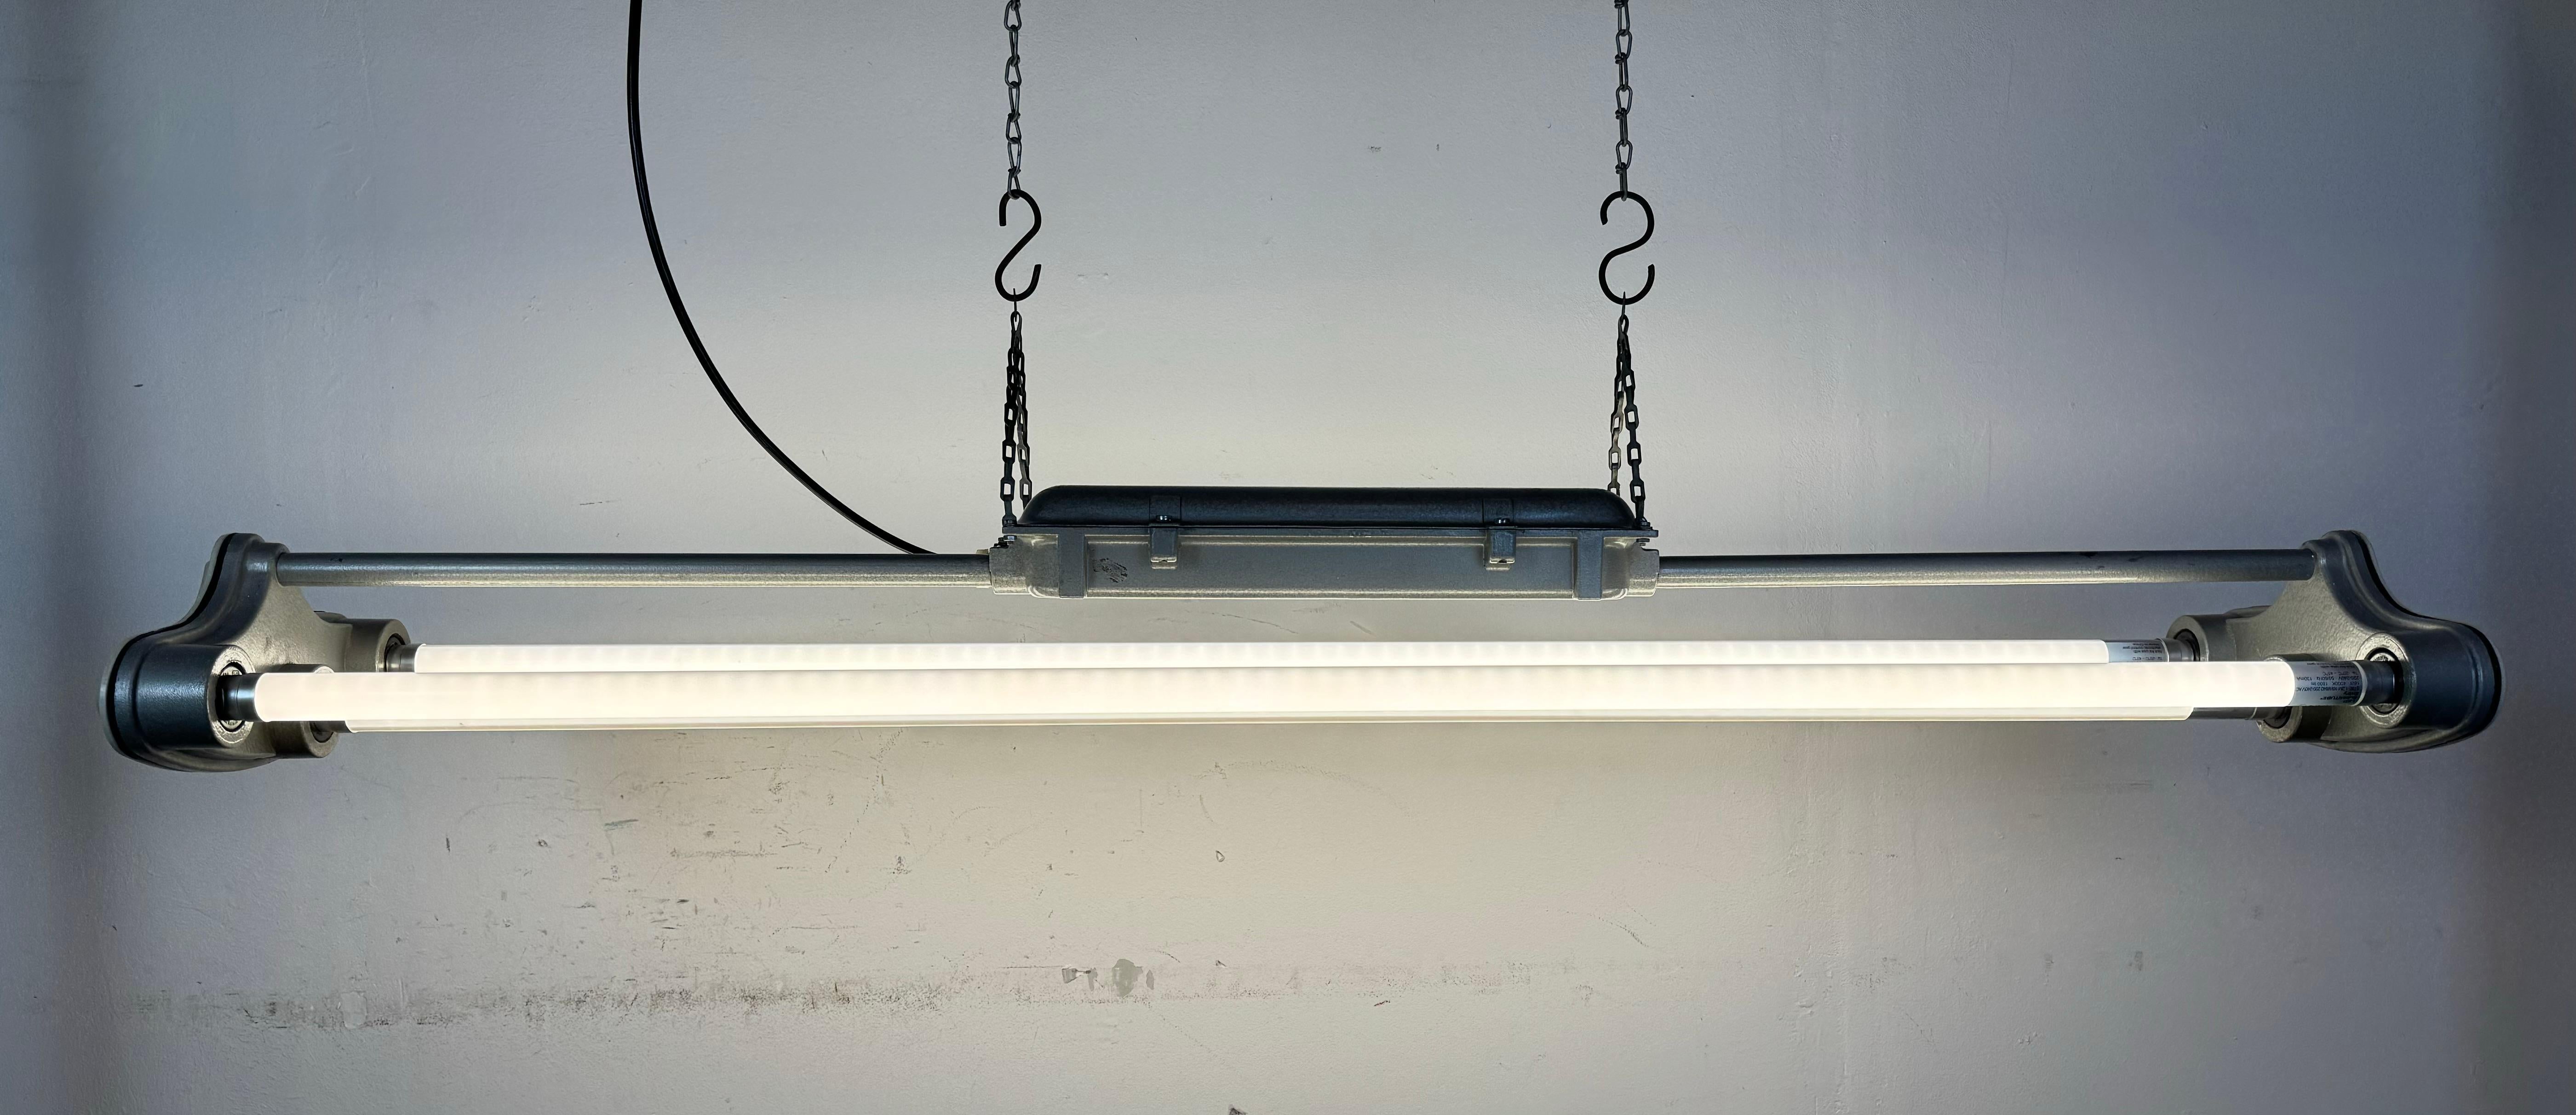 Grey Industrial Hanging Tube Light from Polam Gdansk, 1970s For Sale 10